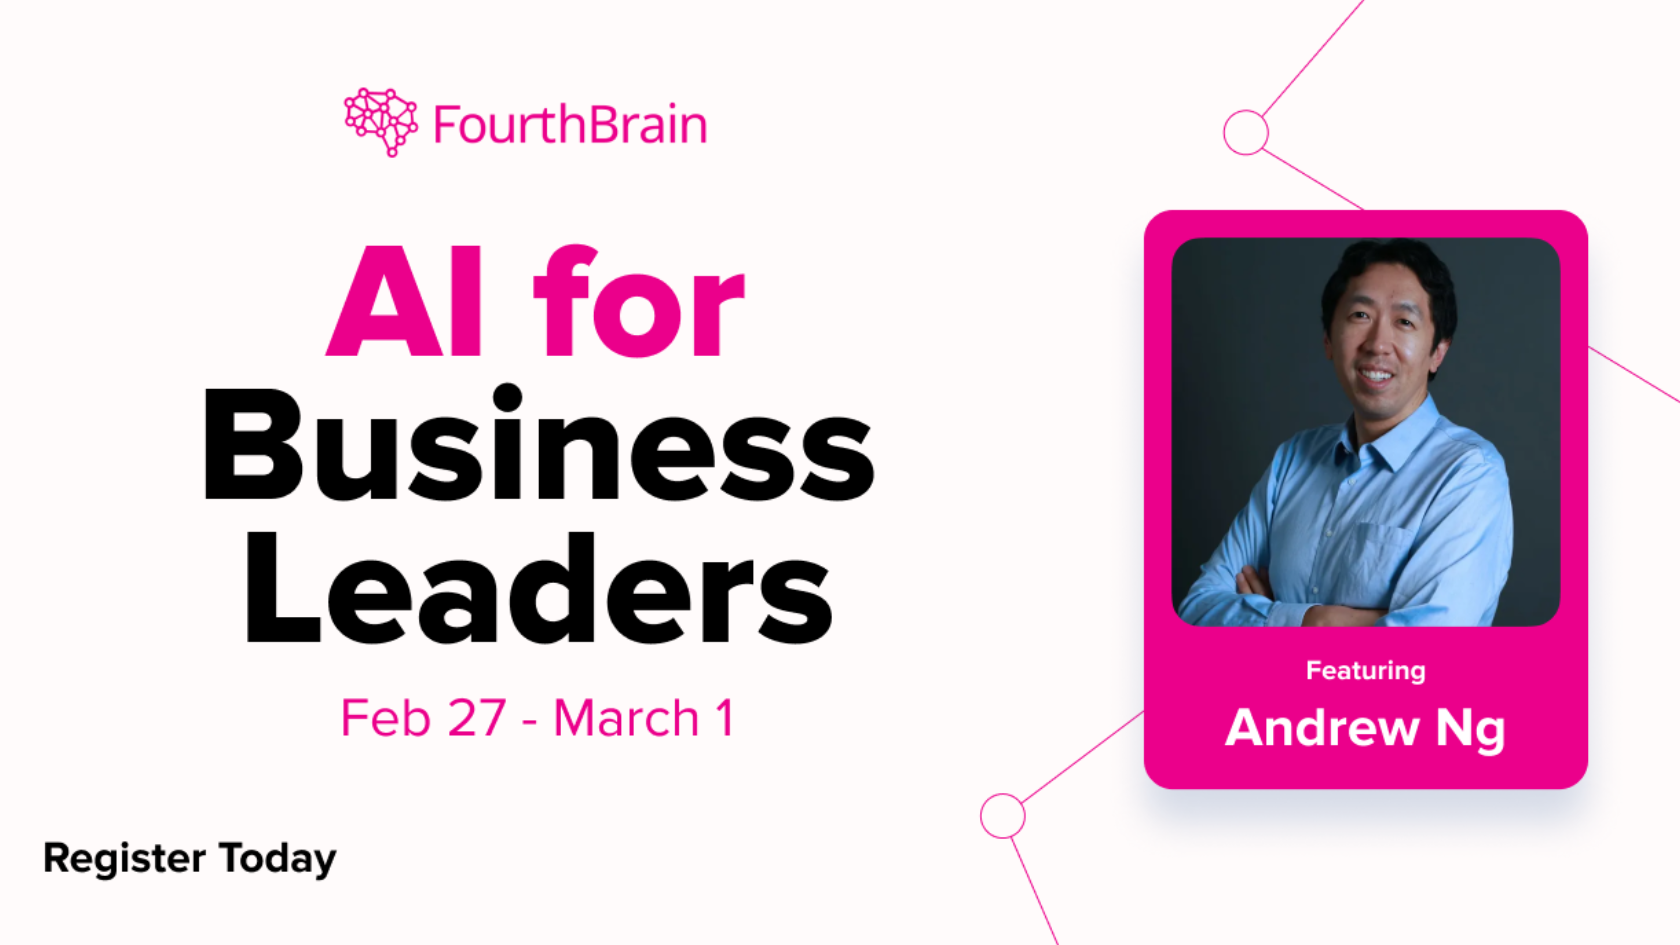 FourthBrain's AI for Business Leaders event banner ad